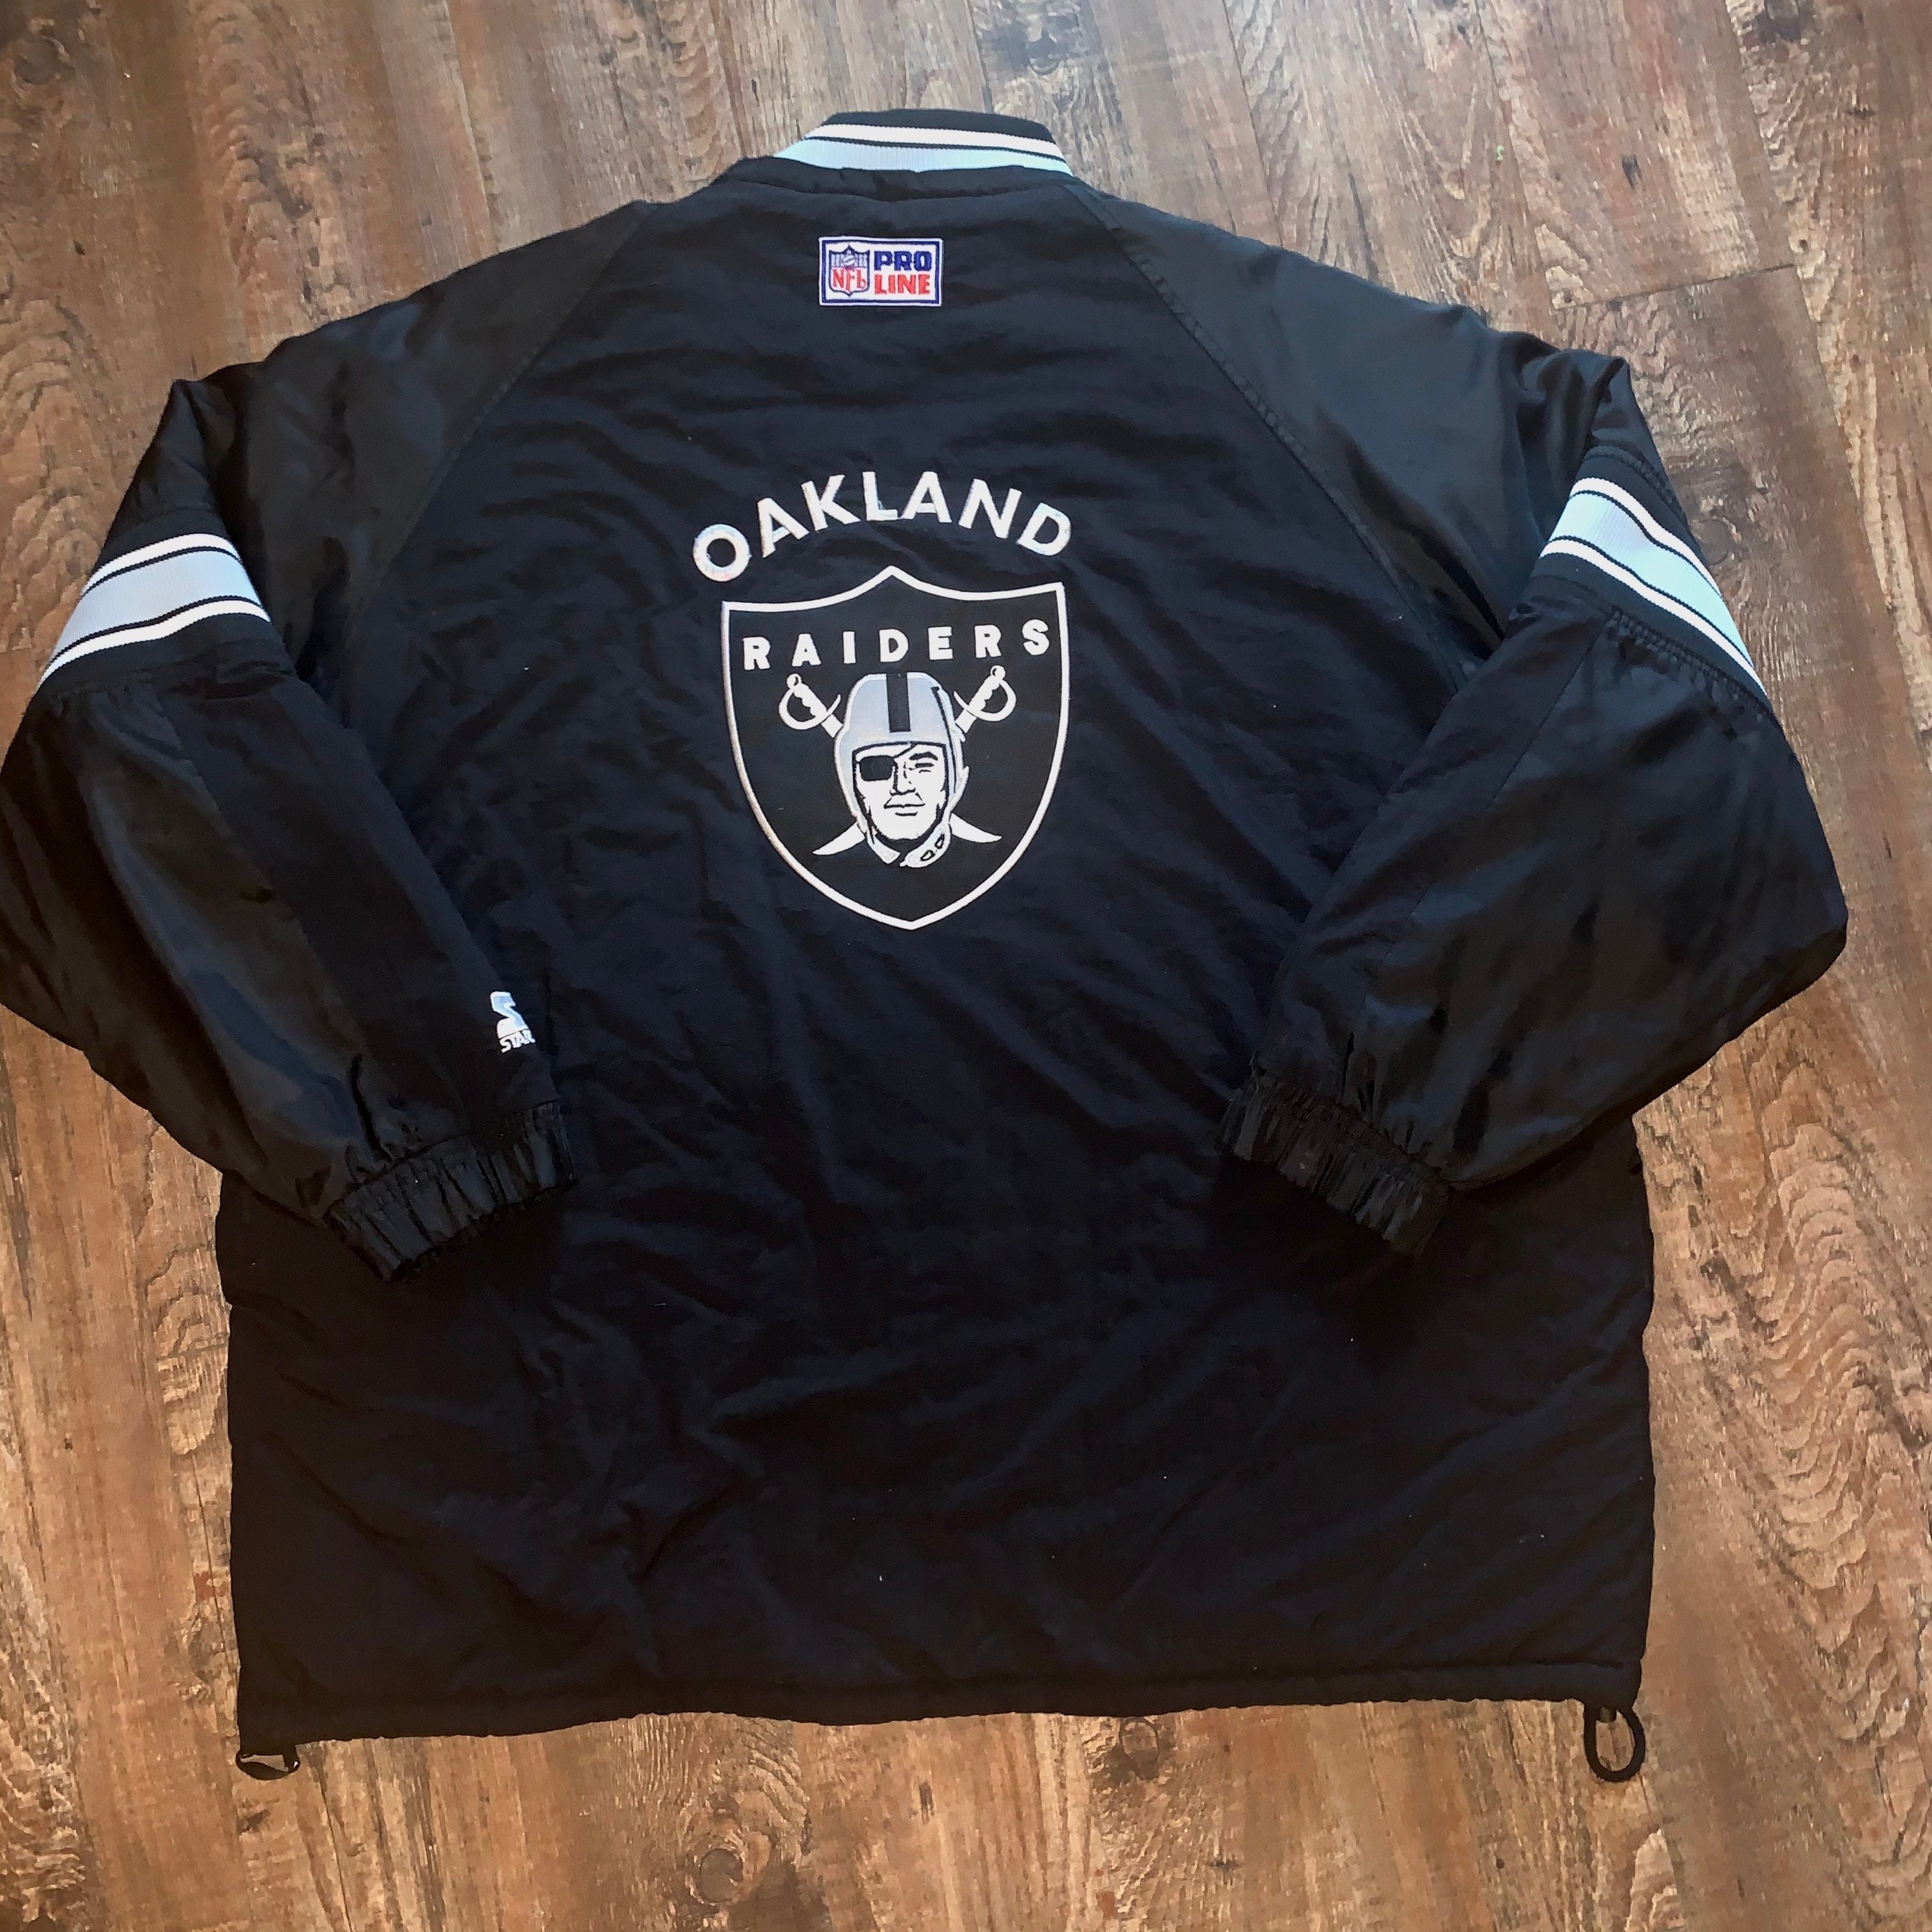 NFL Oakland Raiders Licensed Dog Hoodie - Small - 3X